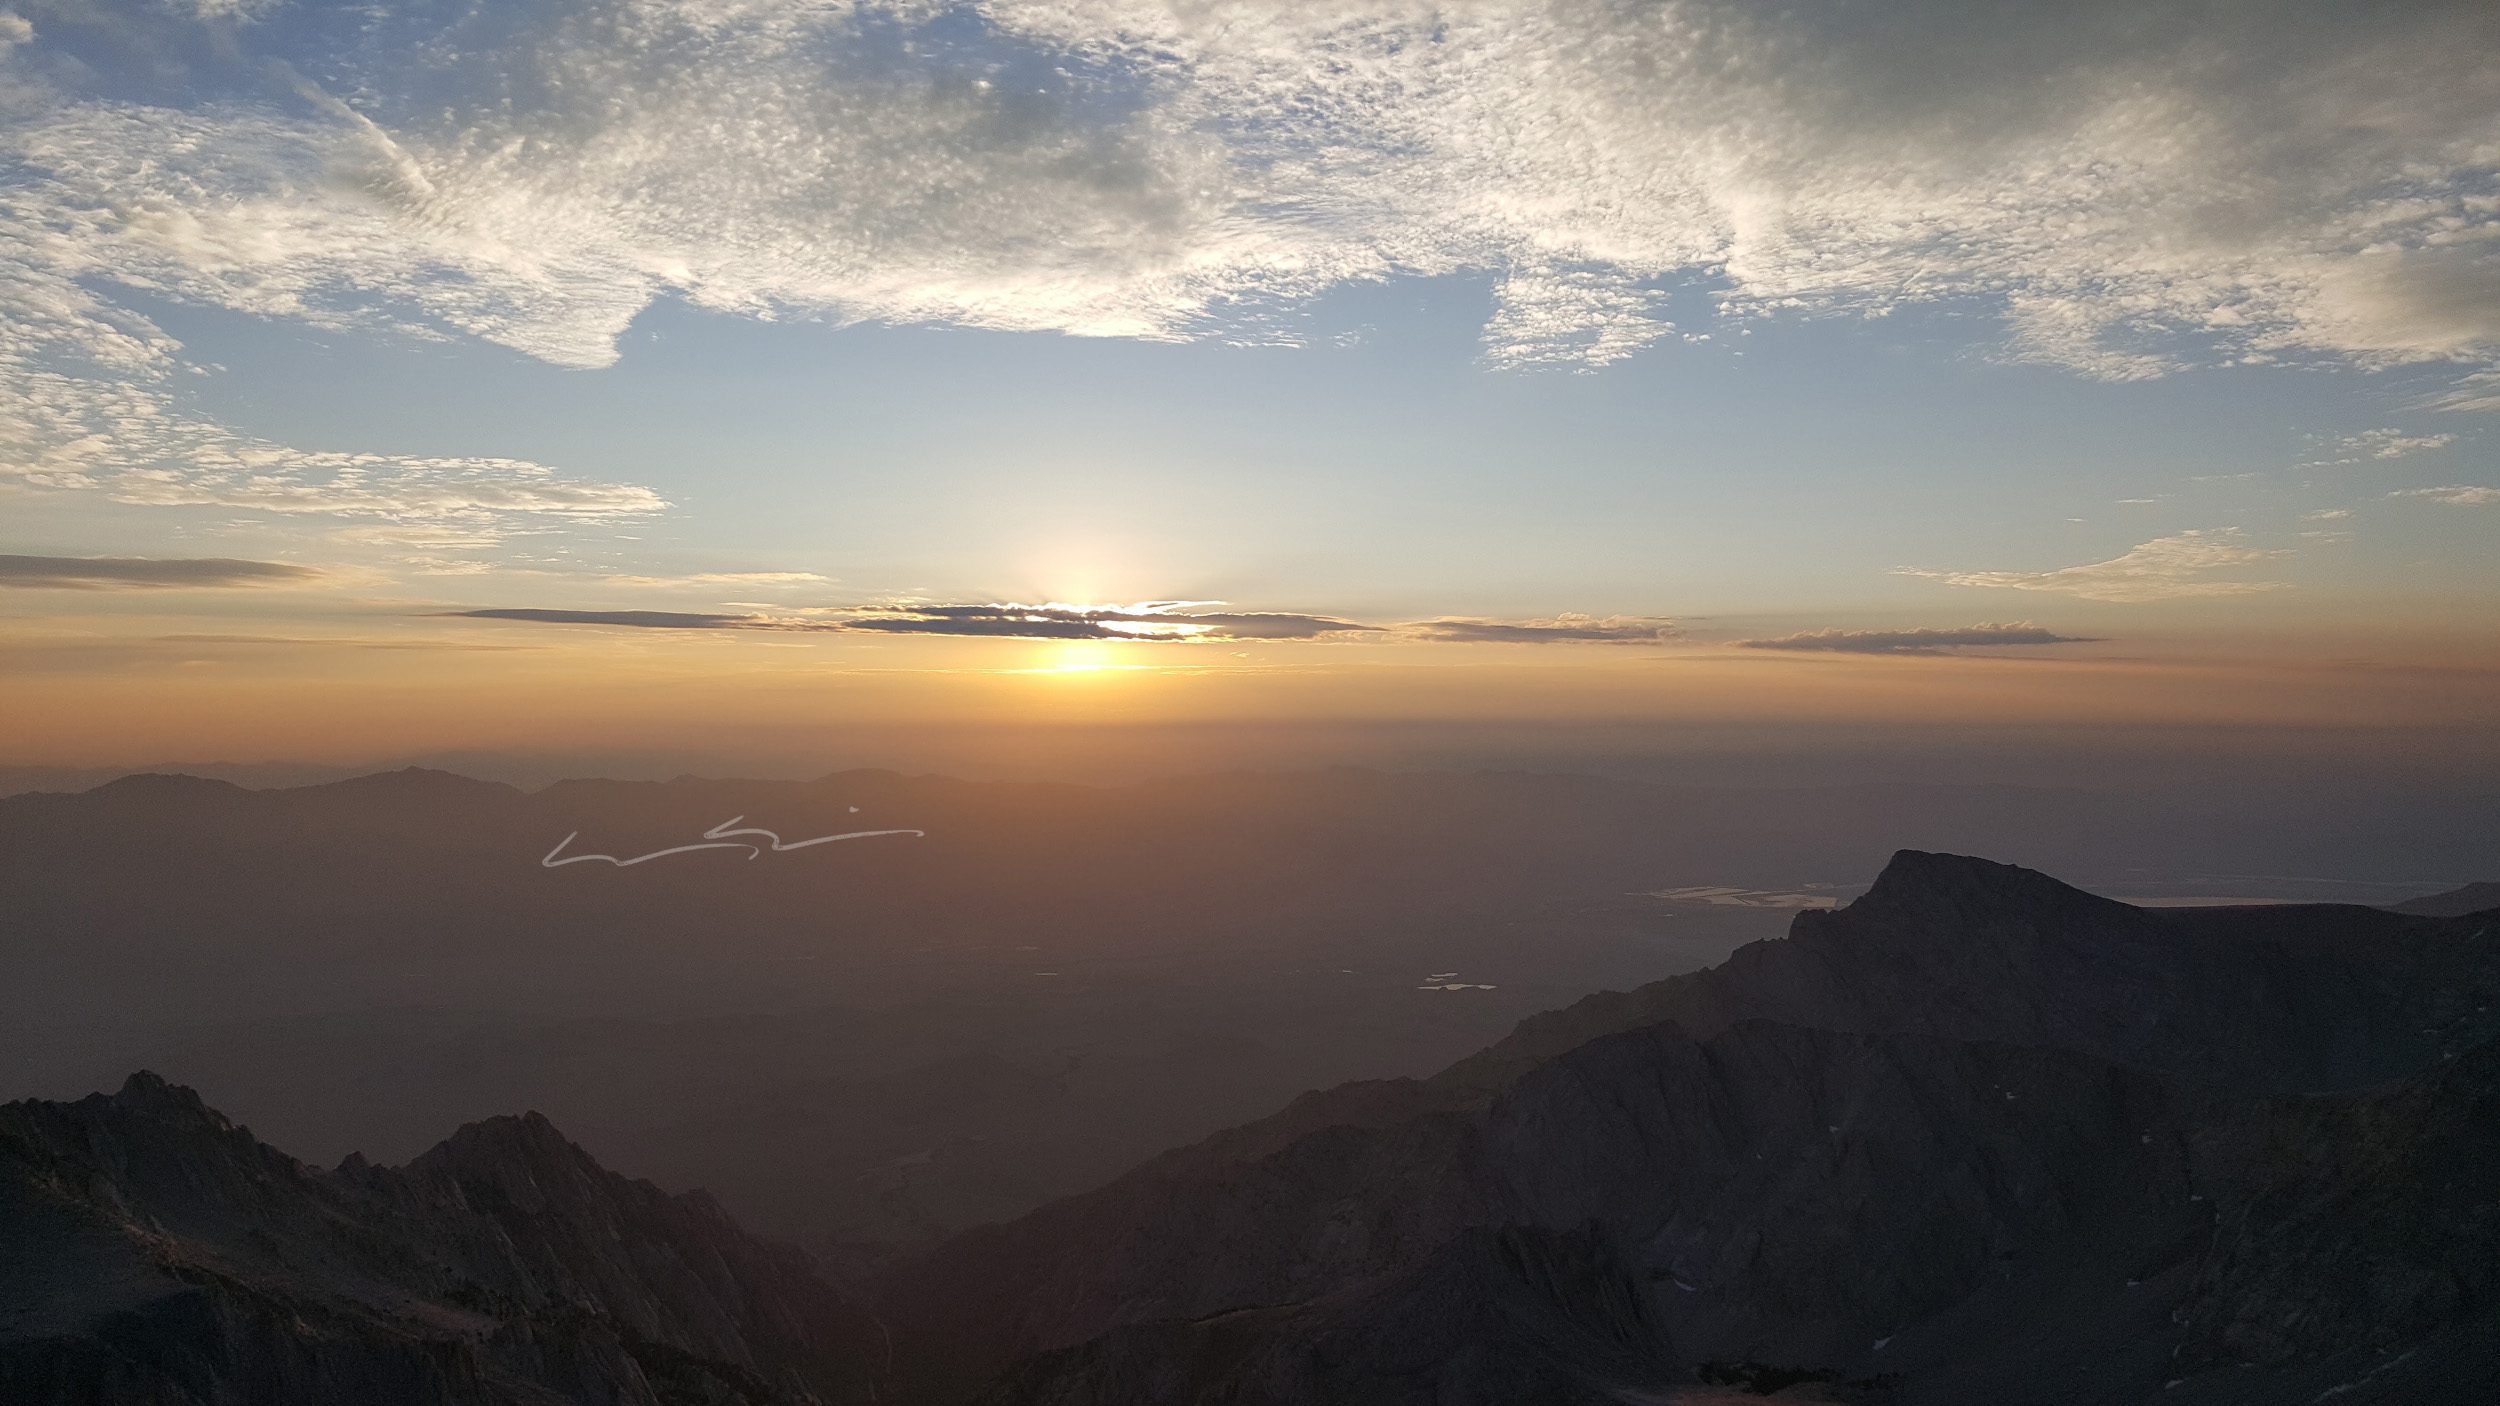 sunrise from the summit of mount whitney in california